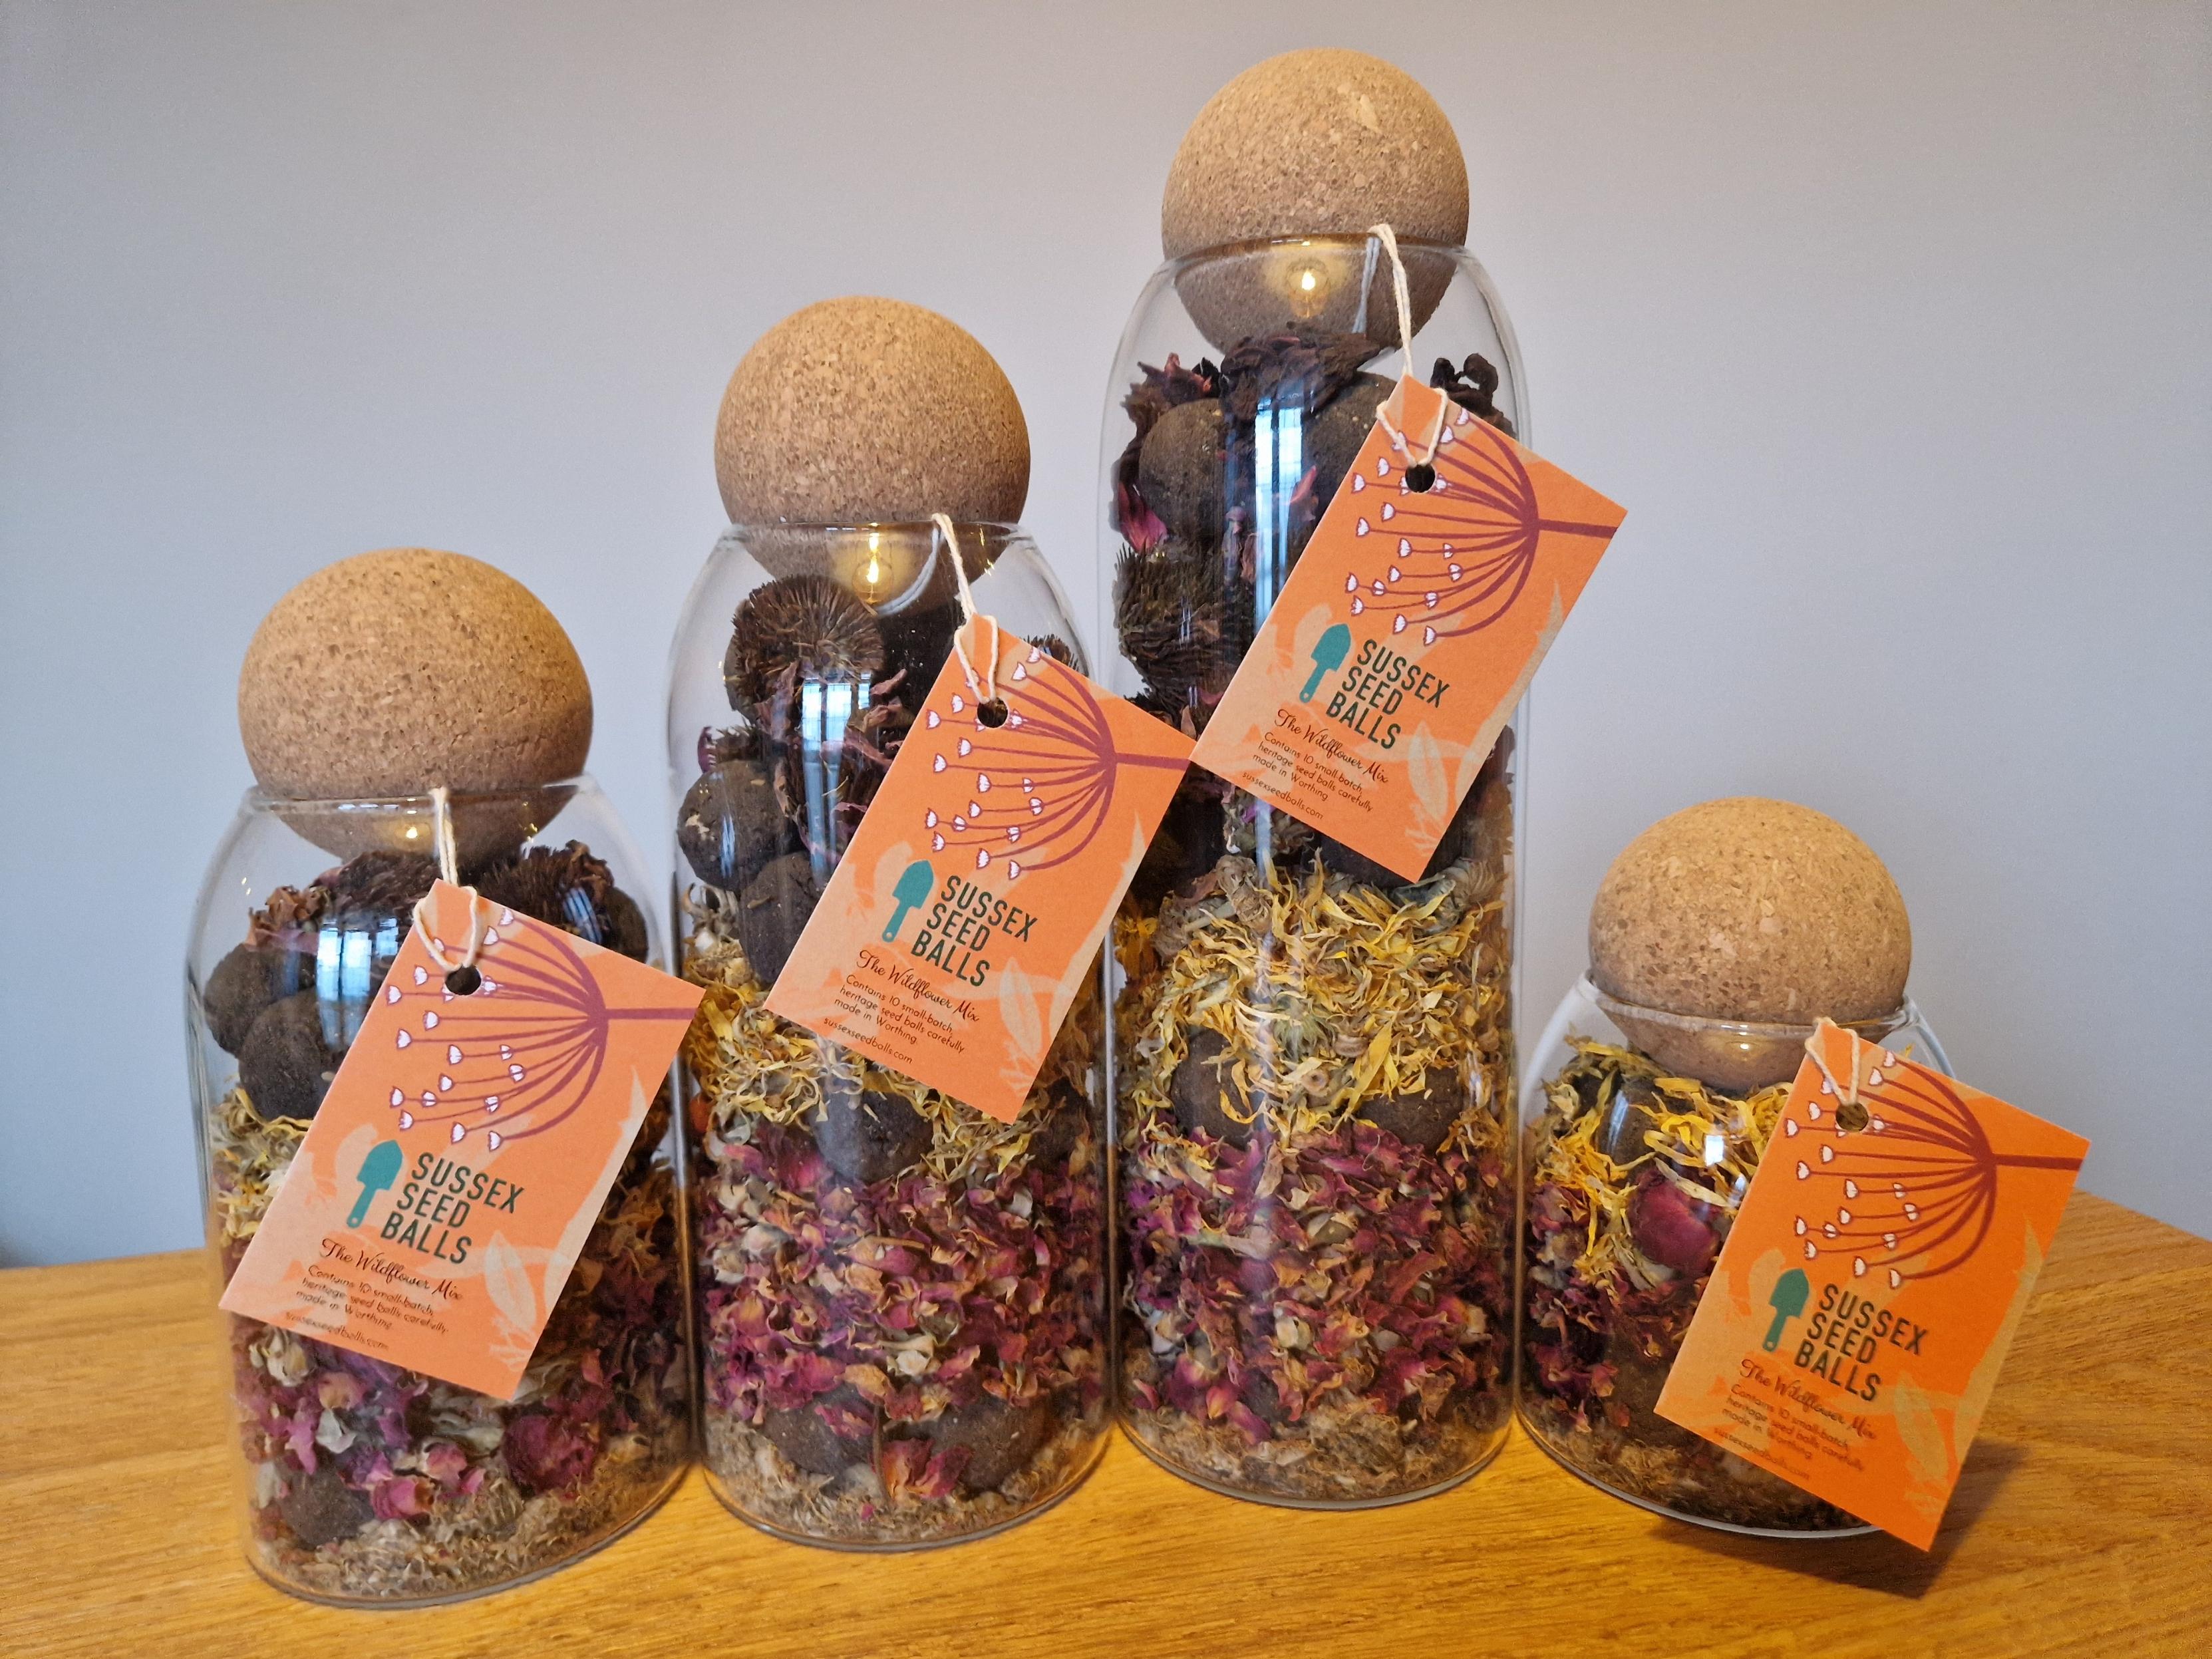 Sussex Seed Balls Original Wildflower Mix Jar - With Dried Natural Flowers